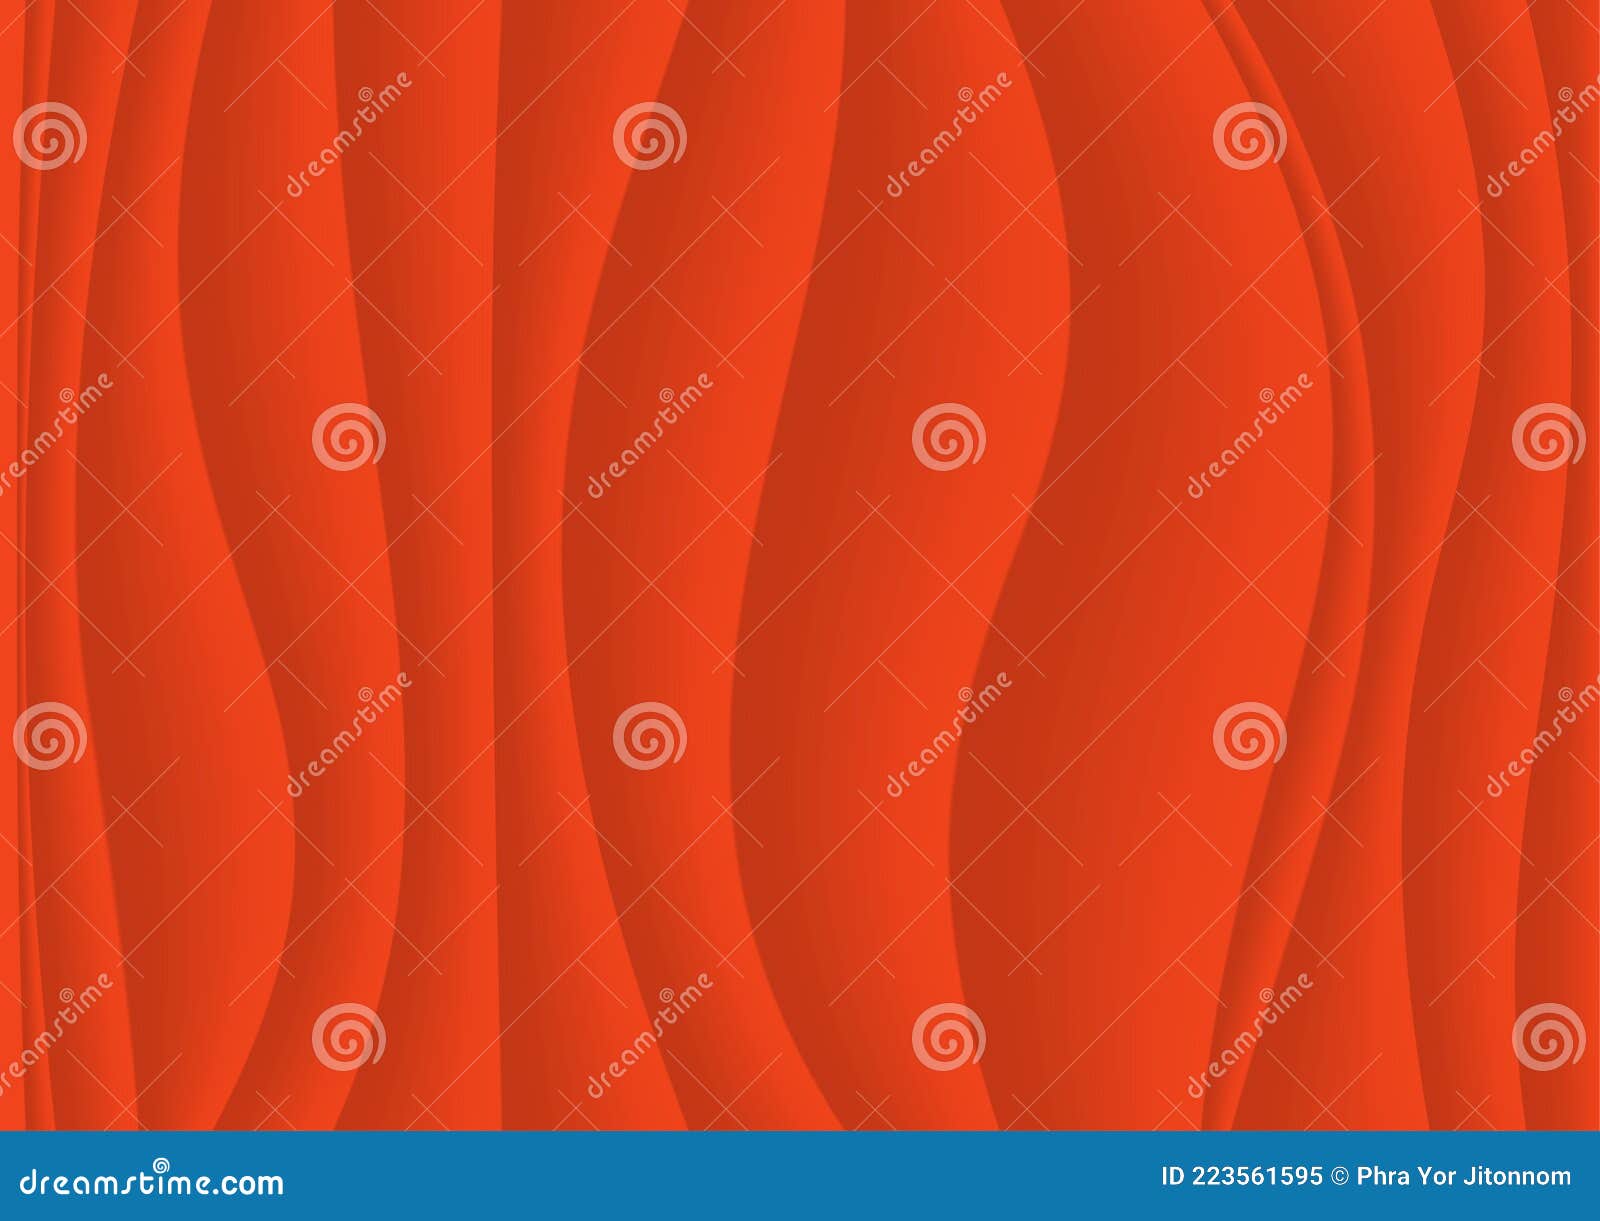 Abstract background luxury red cloth or liquid Vector Image